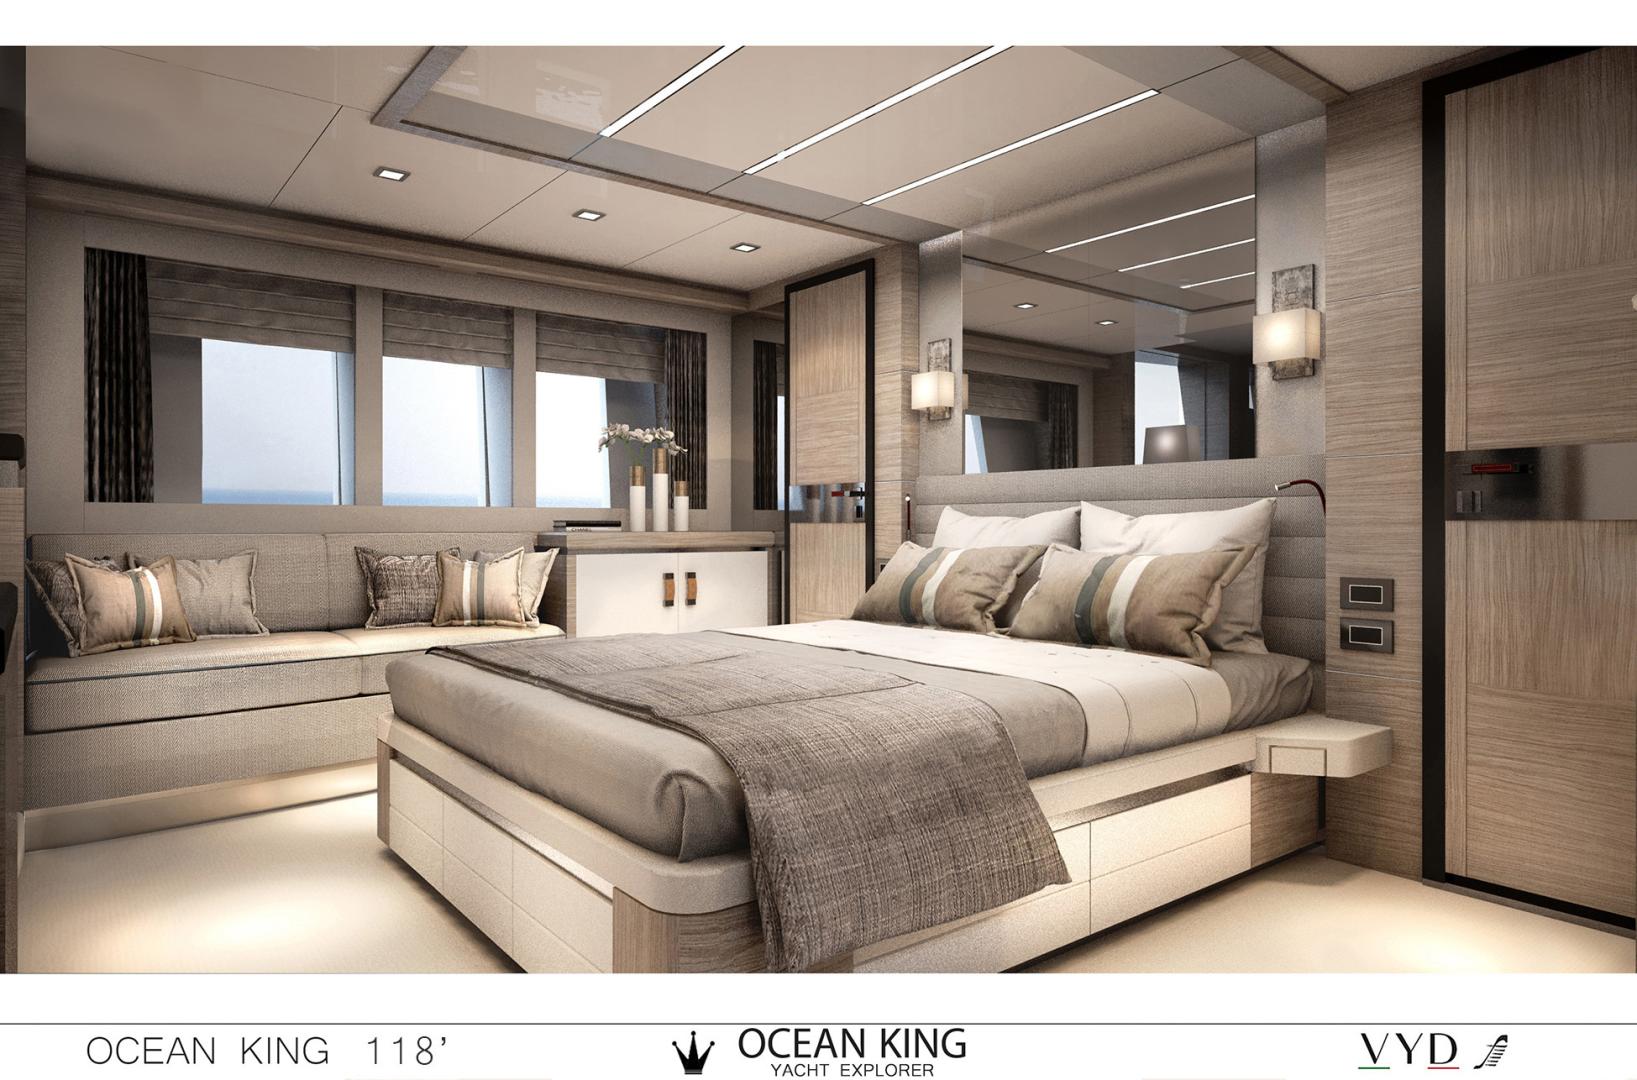 Ocean King of Chioggia has announced a New Classic 108 model